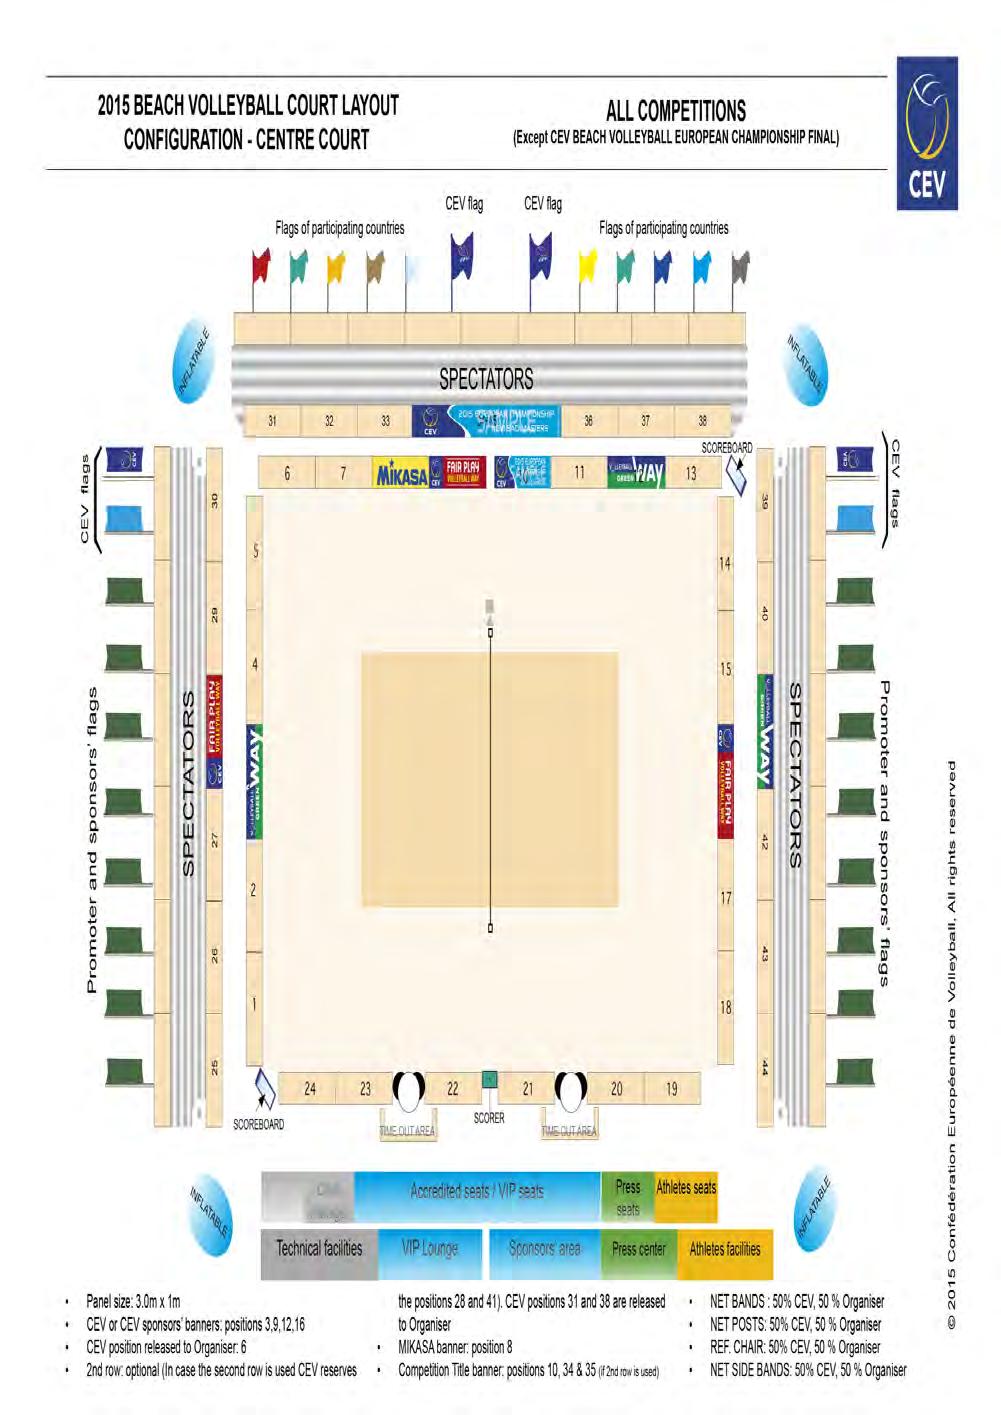 ANNEX 5 - Official court layouts The centre court and all side courts have to respect valid competition regulations in all technical, organisation and commercial